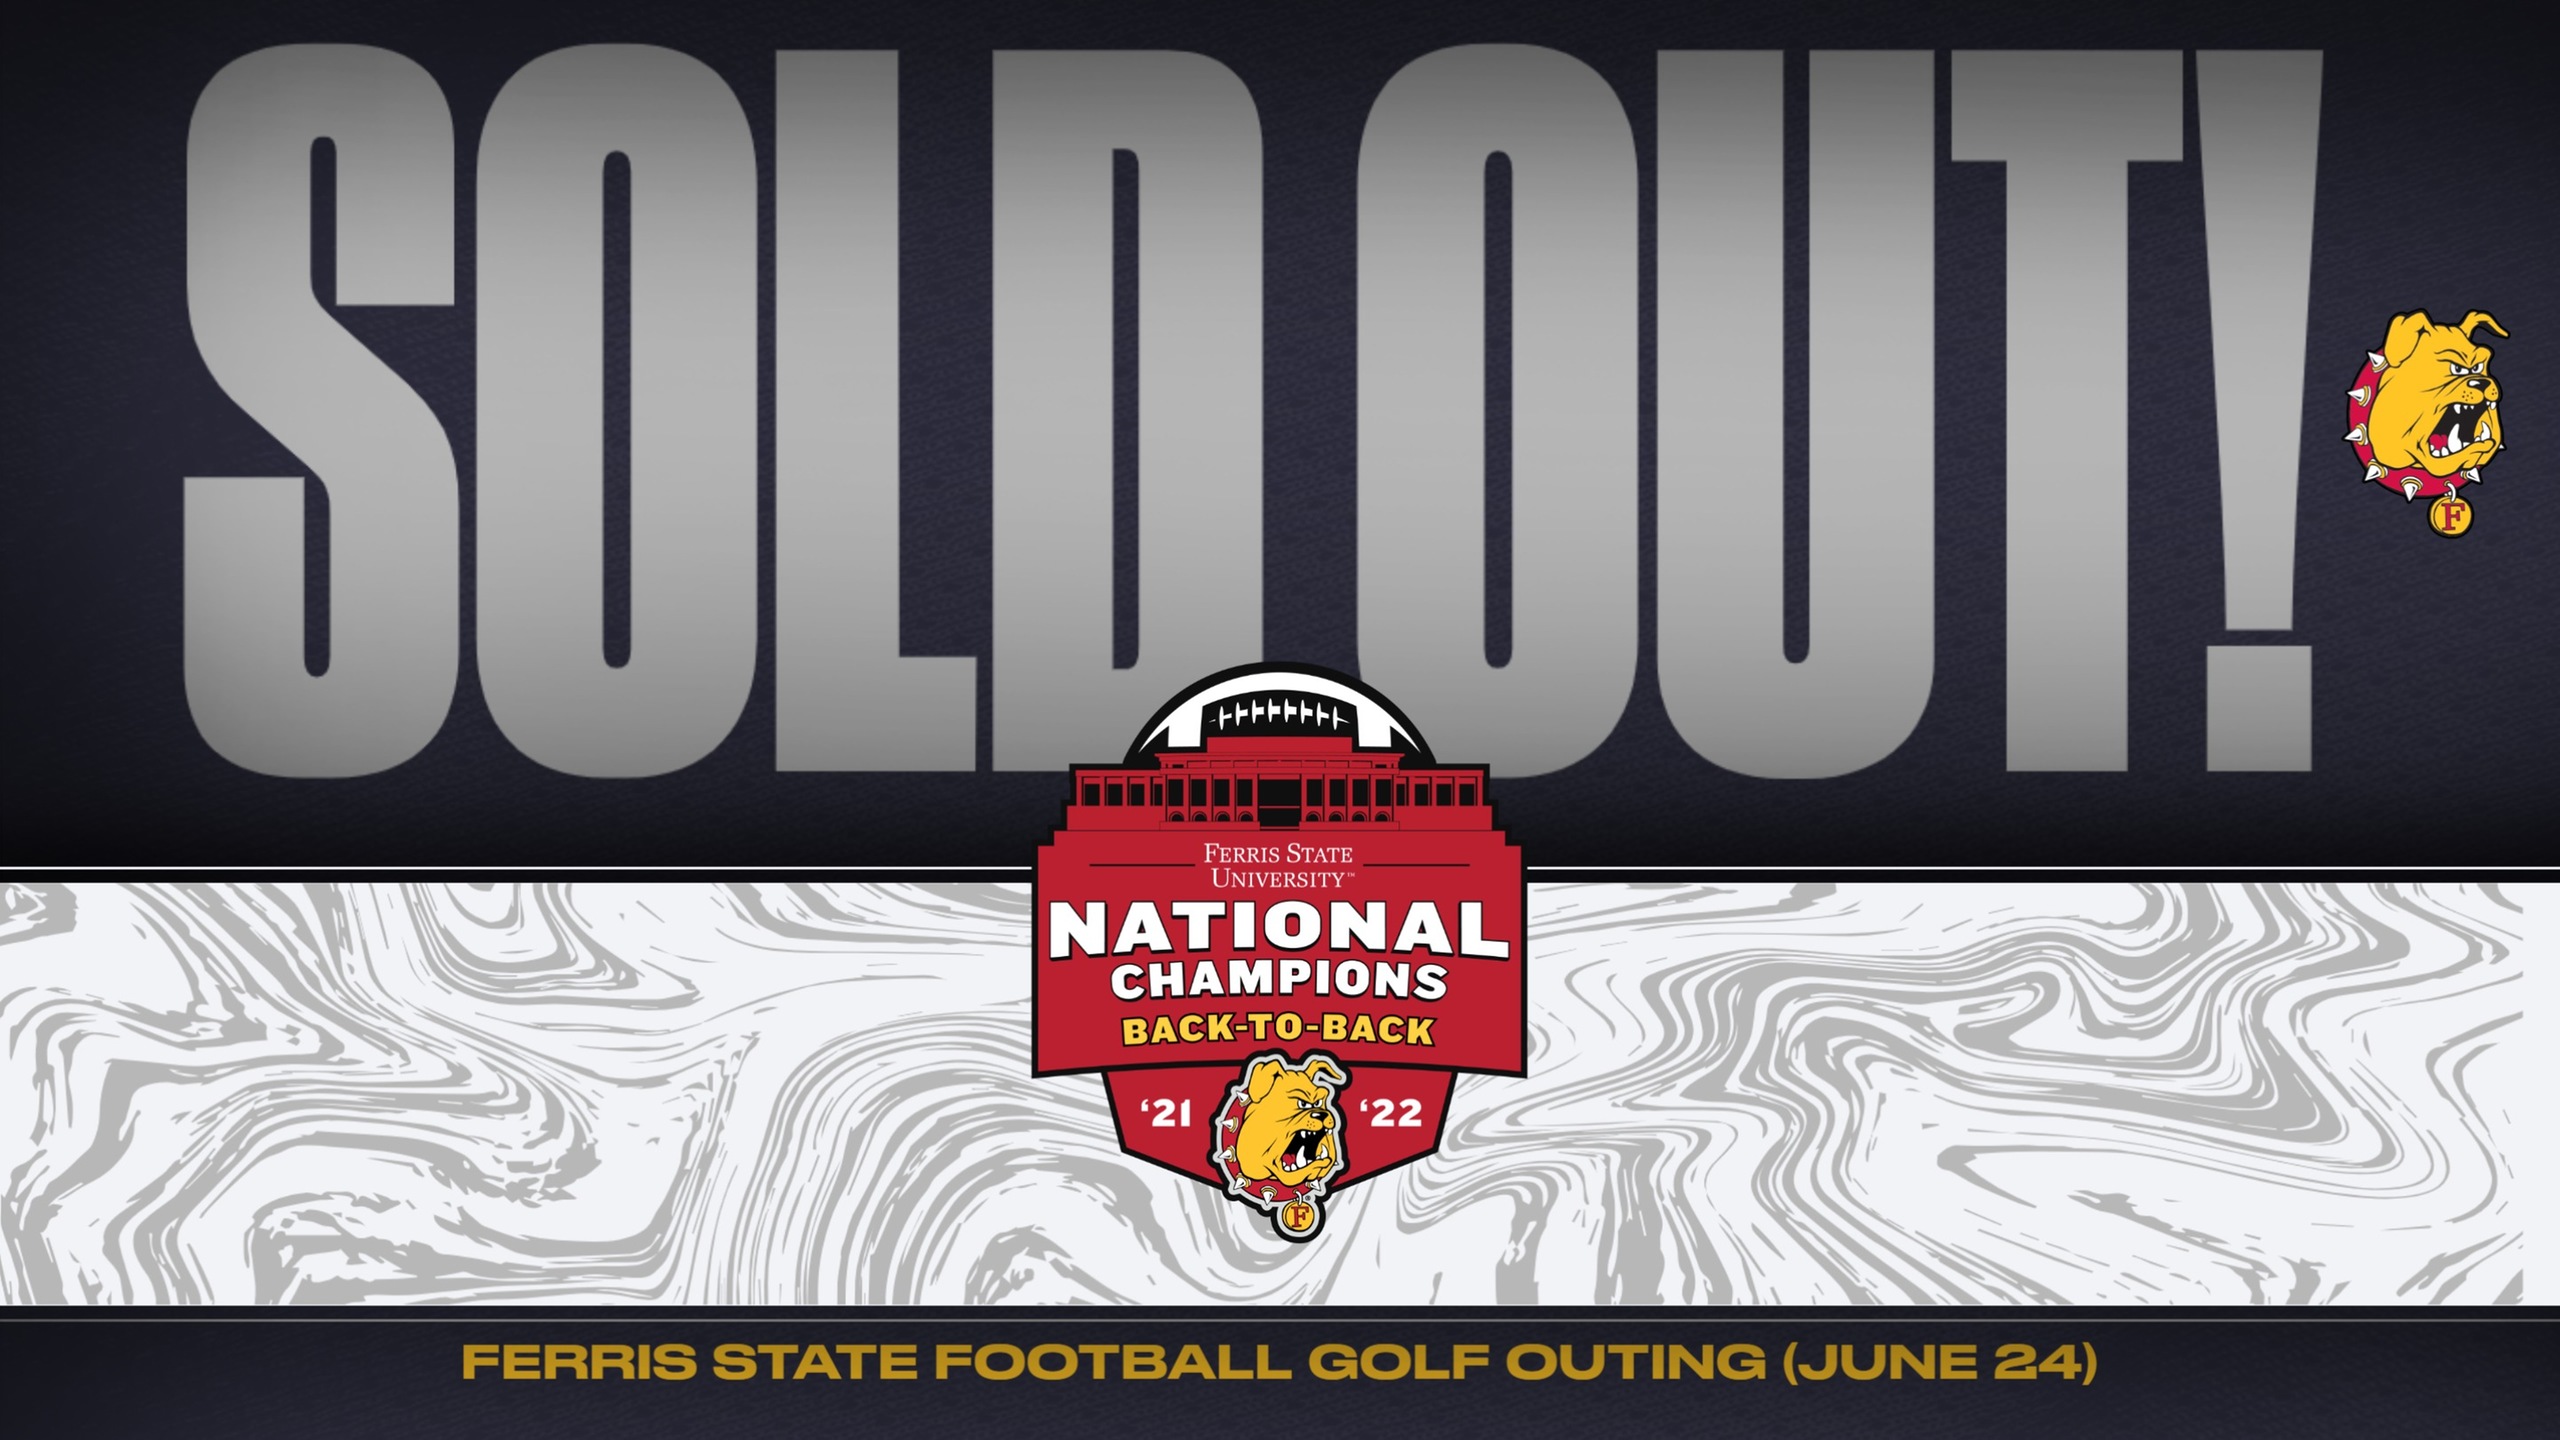 SOLD OUT! 41st Annual Ferris State Football Golf Outing Expecting Huge Turnout This Saturday